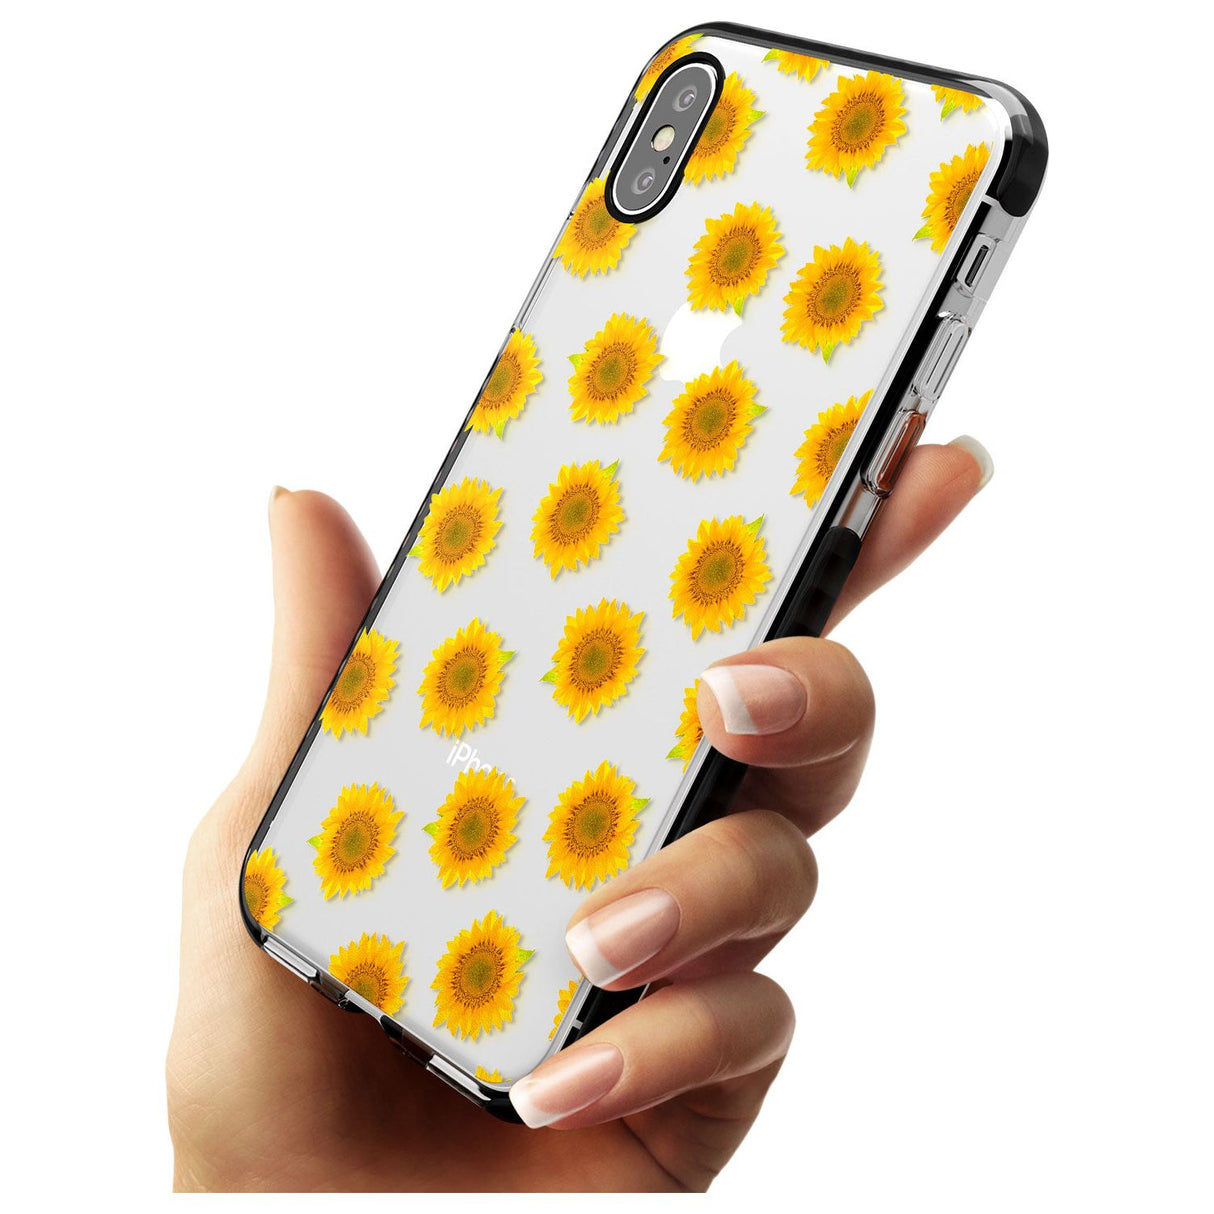 Sunflowers Transparent Pattern Black Impact Phone Case for iPhone X XS Max XR